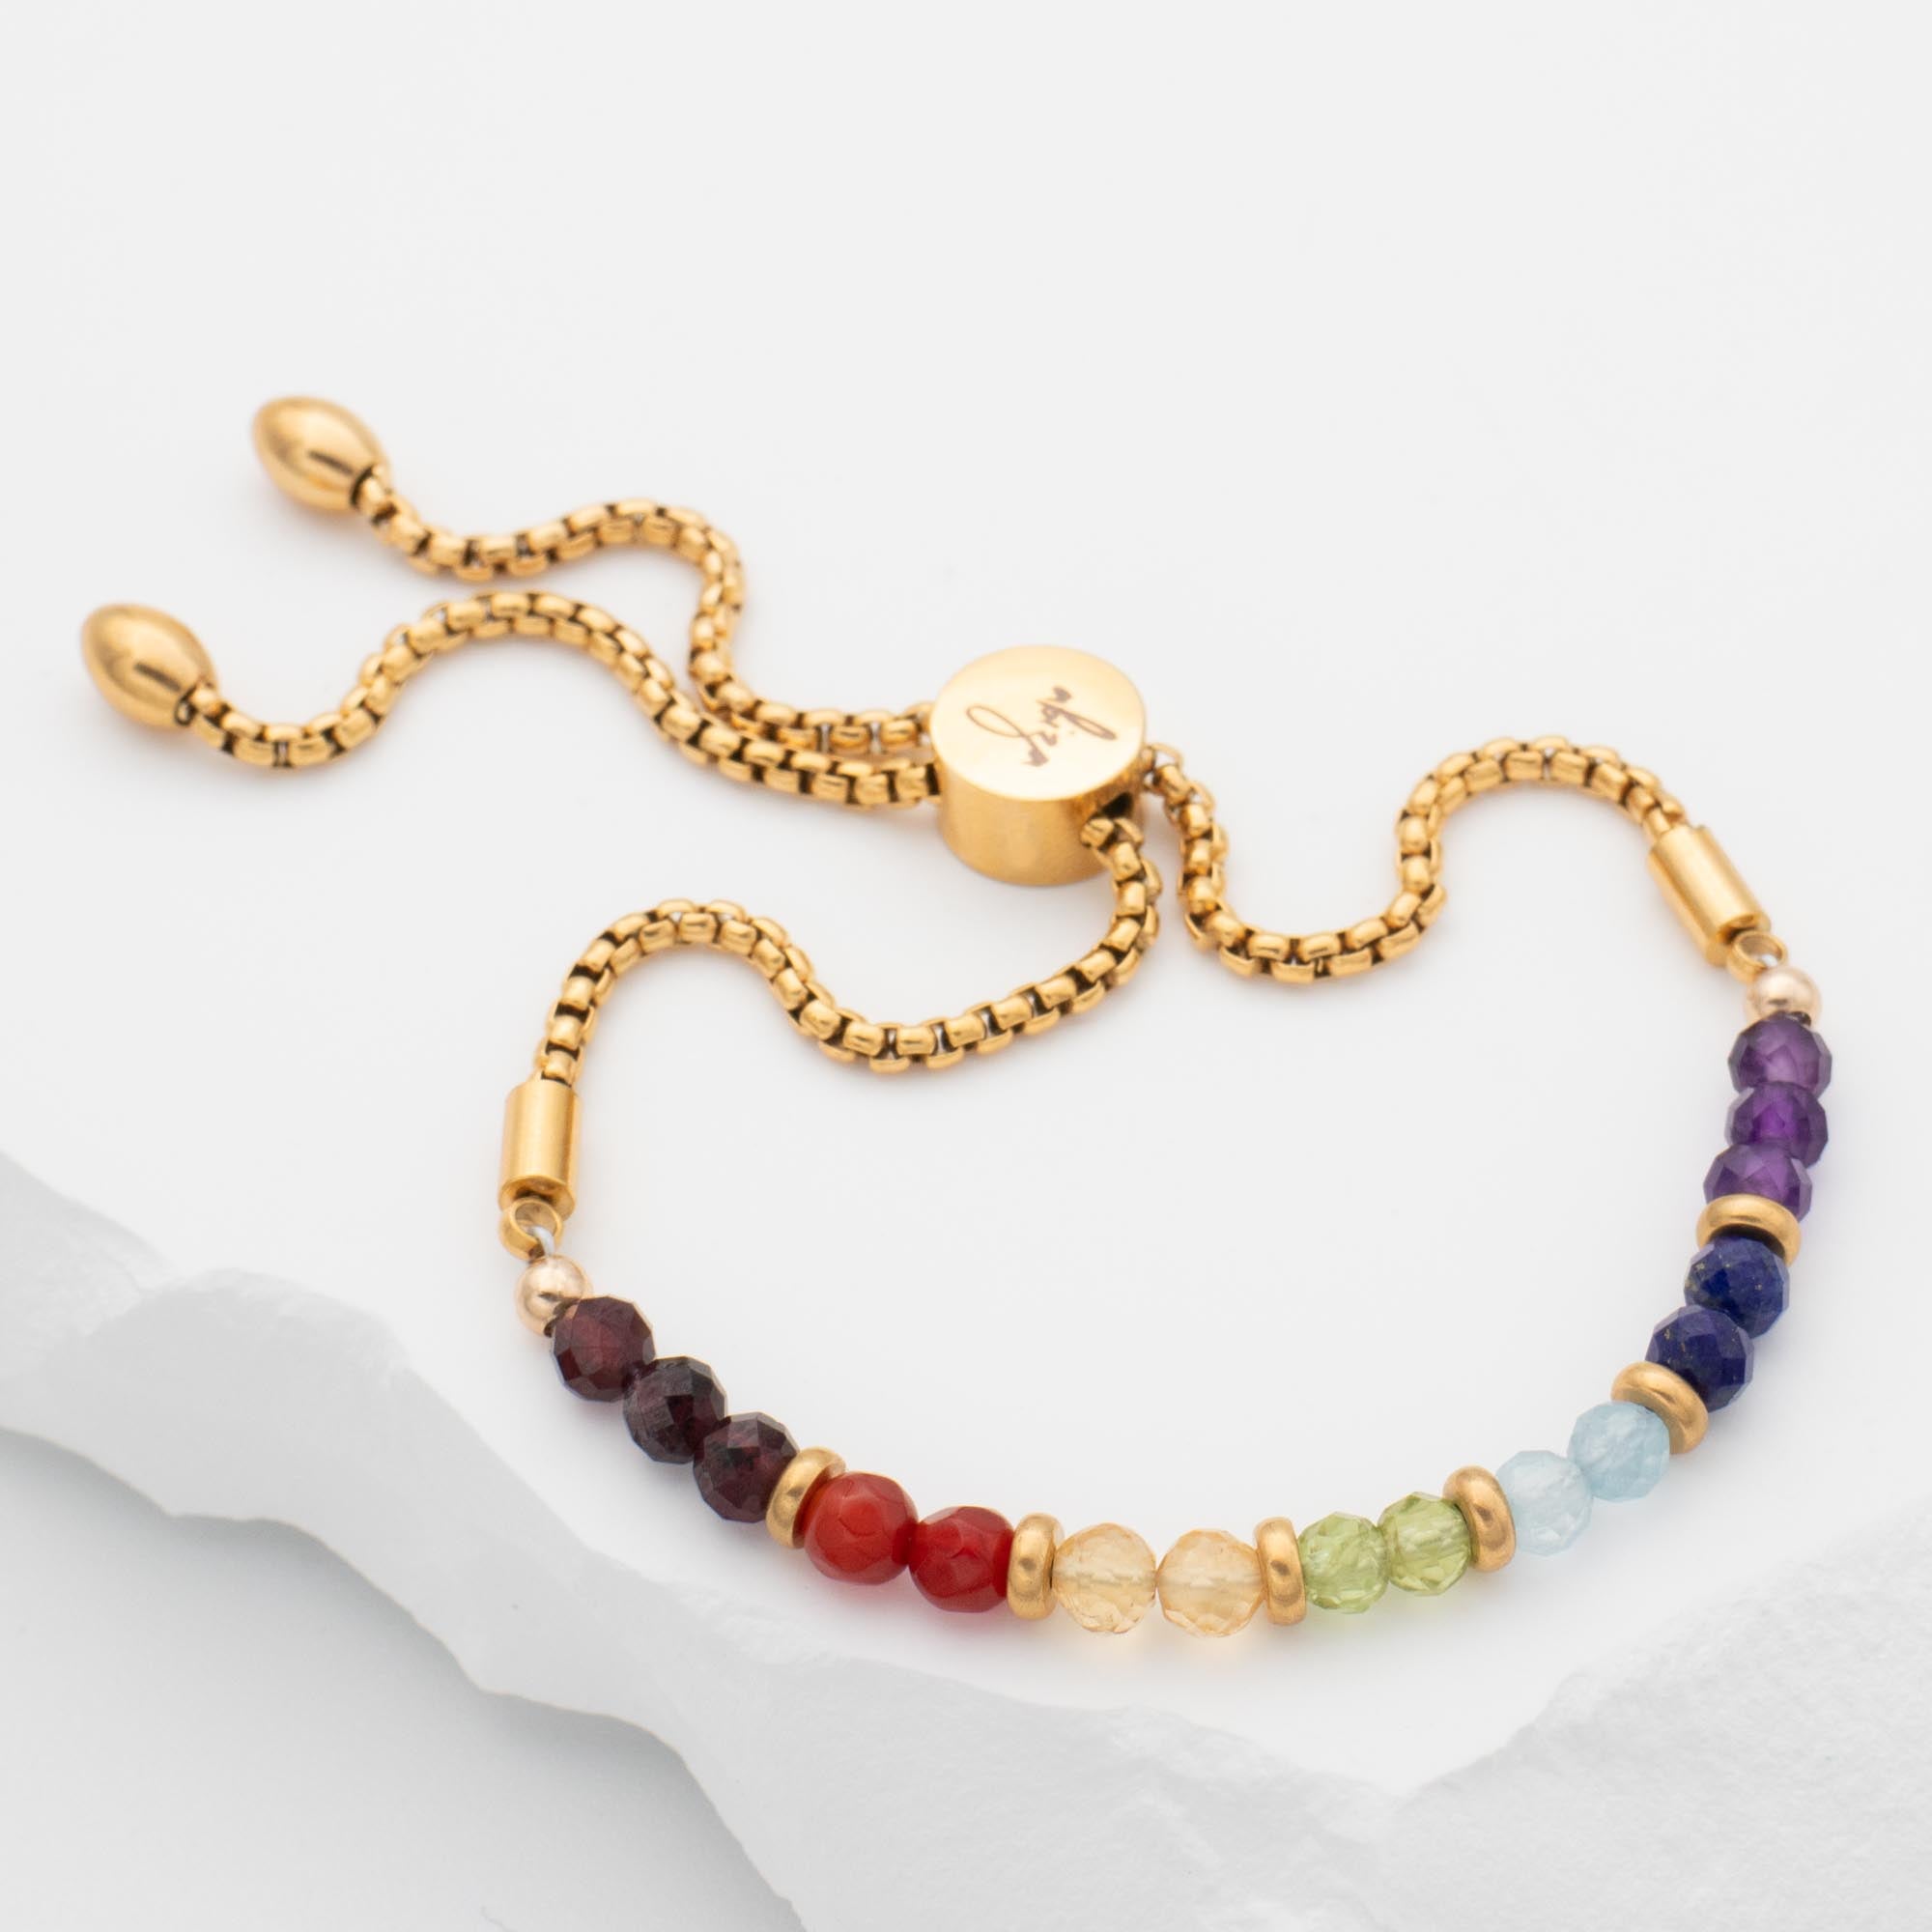 How to Know if Chakra Bracelet is Real: 5 Questions to Ask